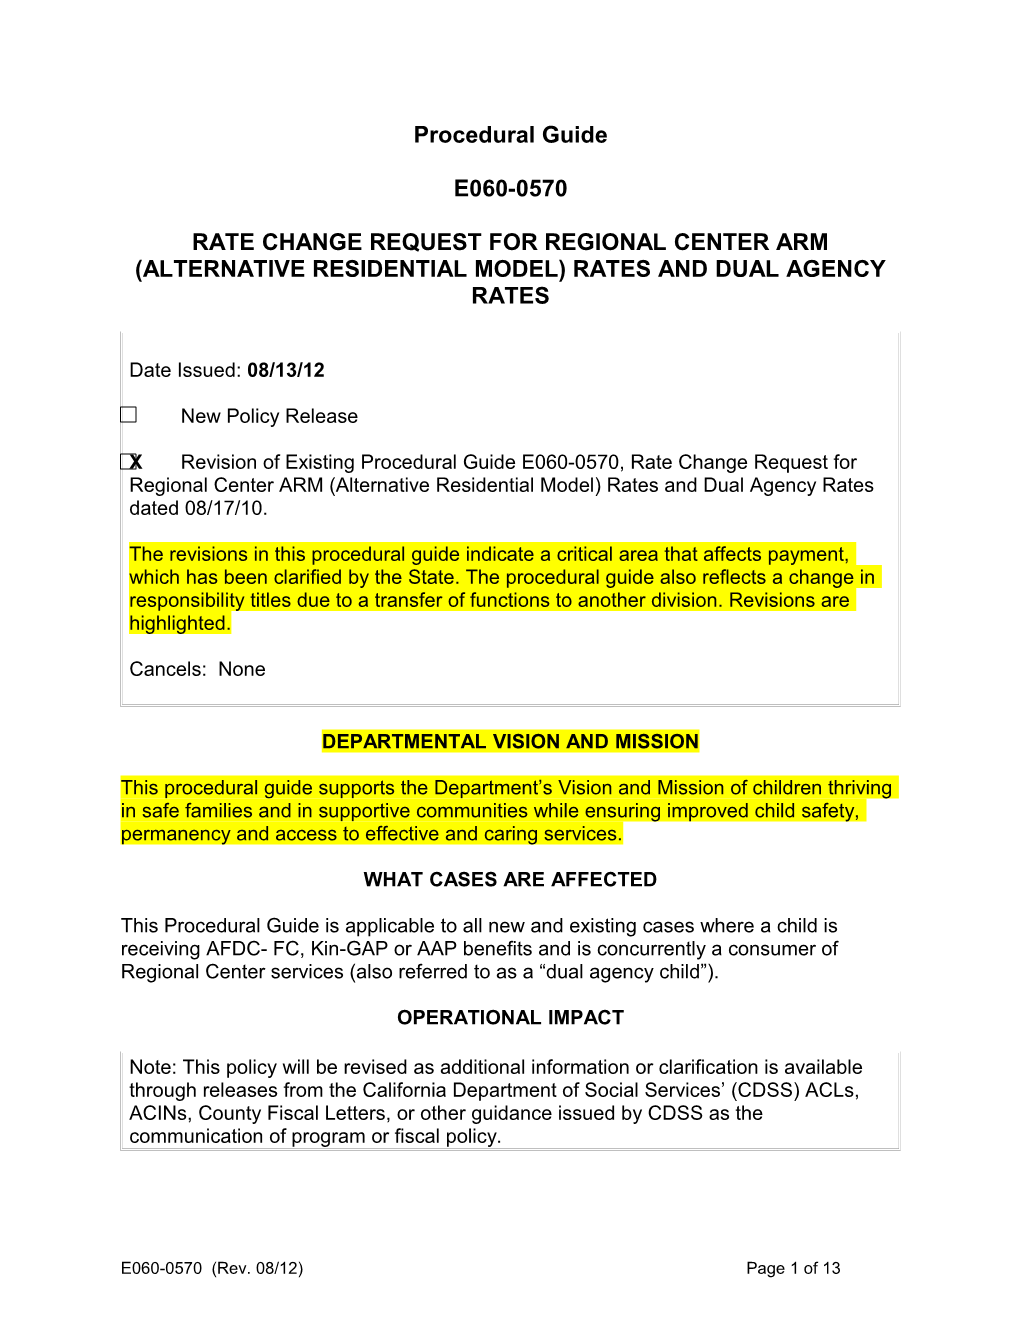 E0600570, Rate Change Request for Regional Center ARM (Alternative Residential Model) Rates